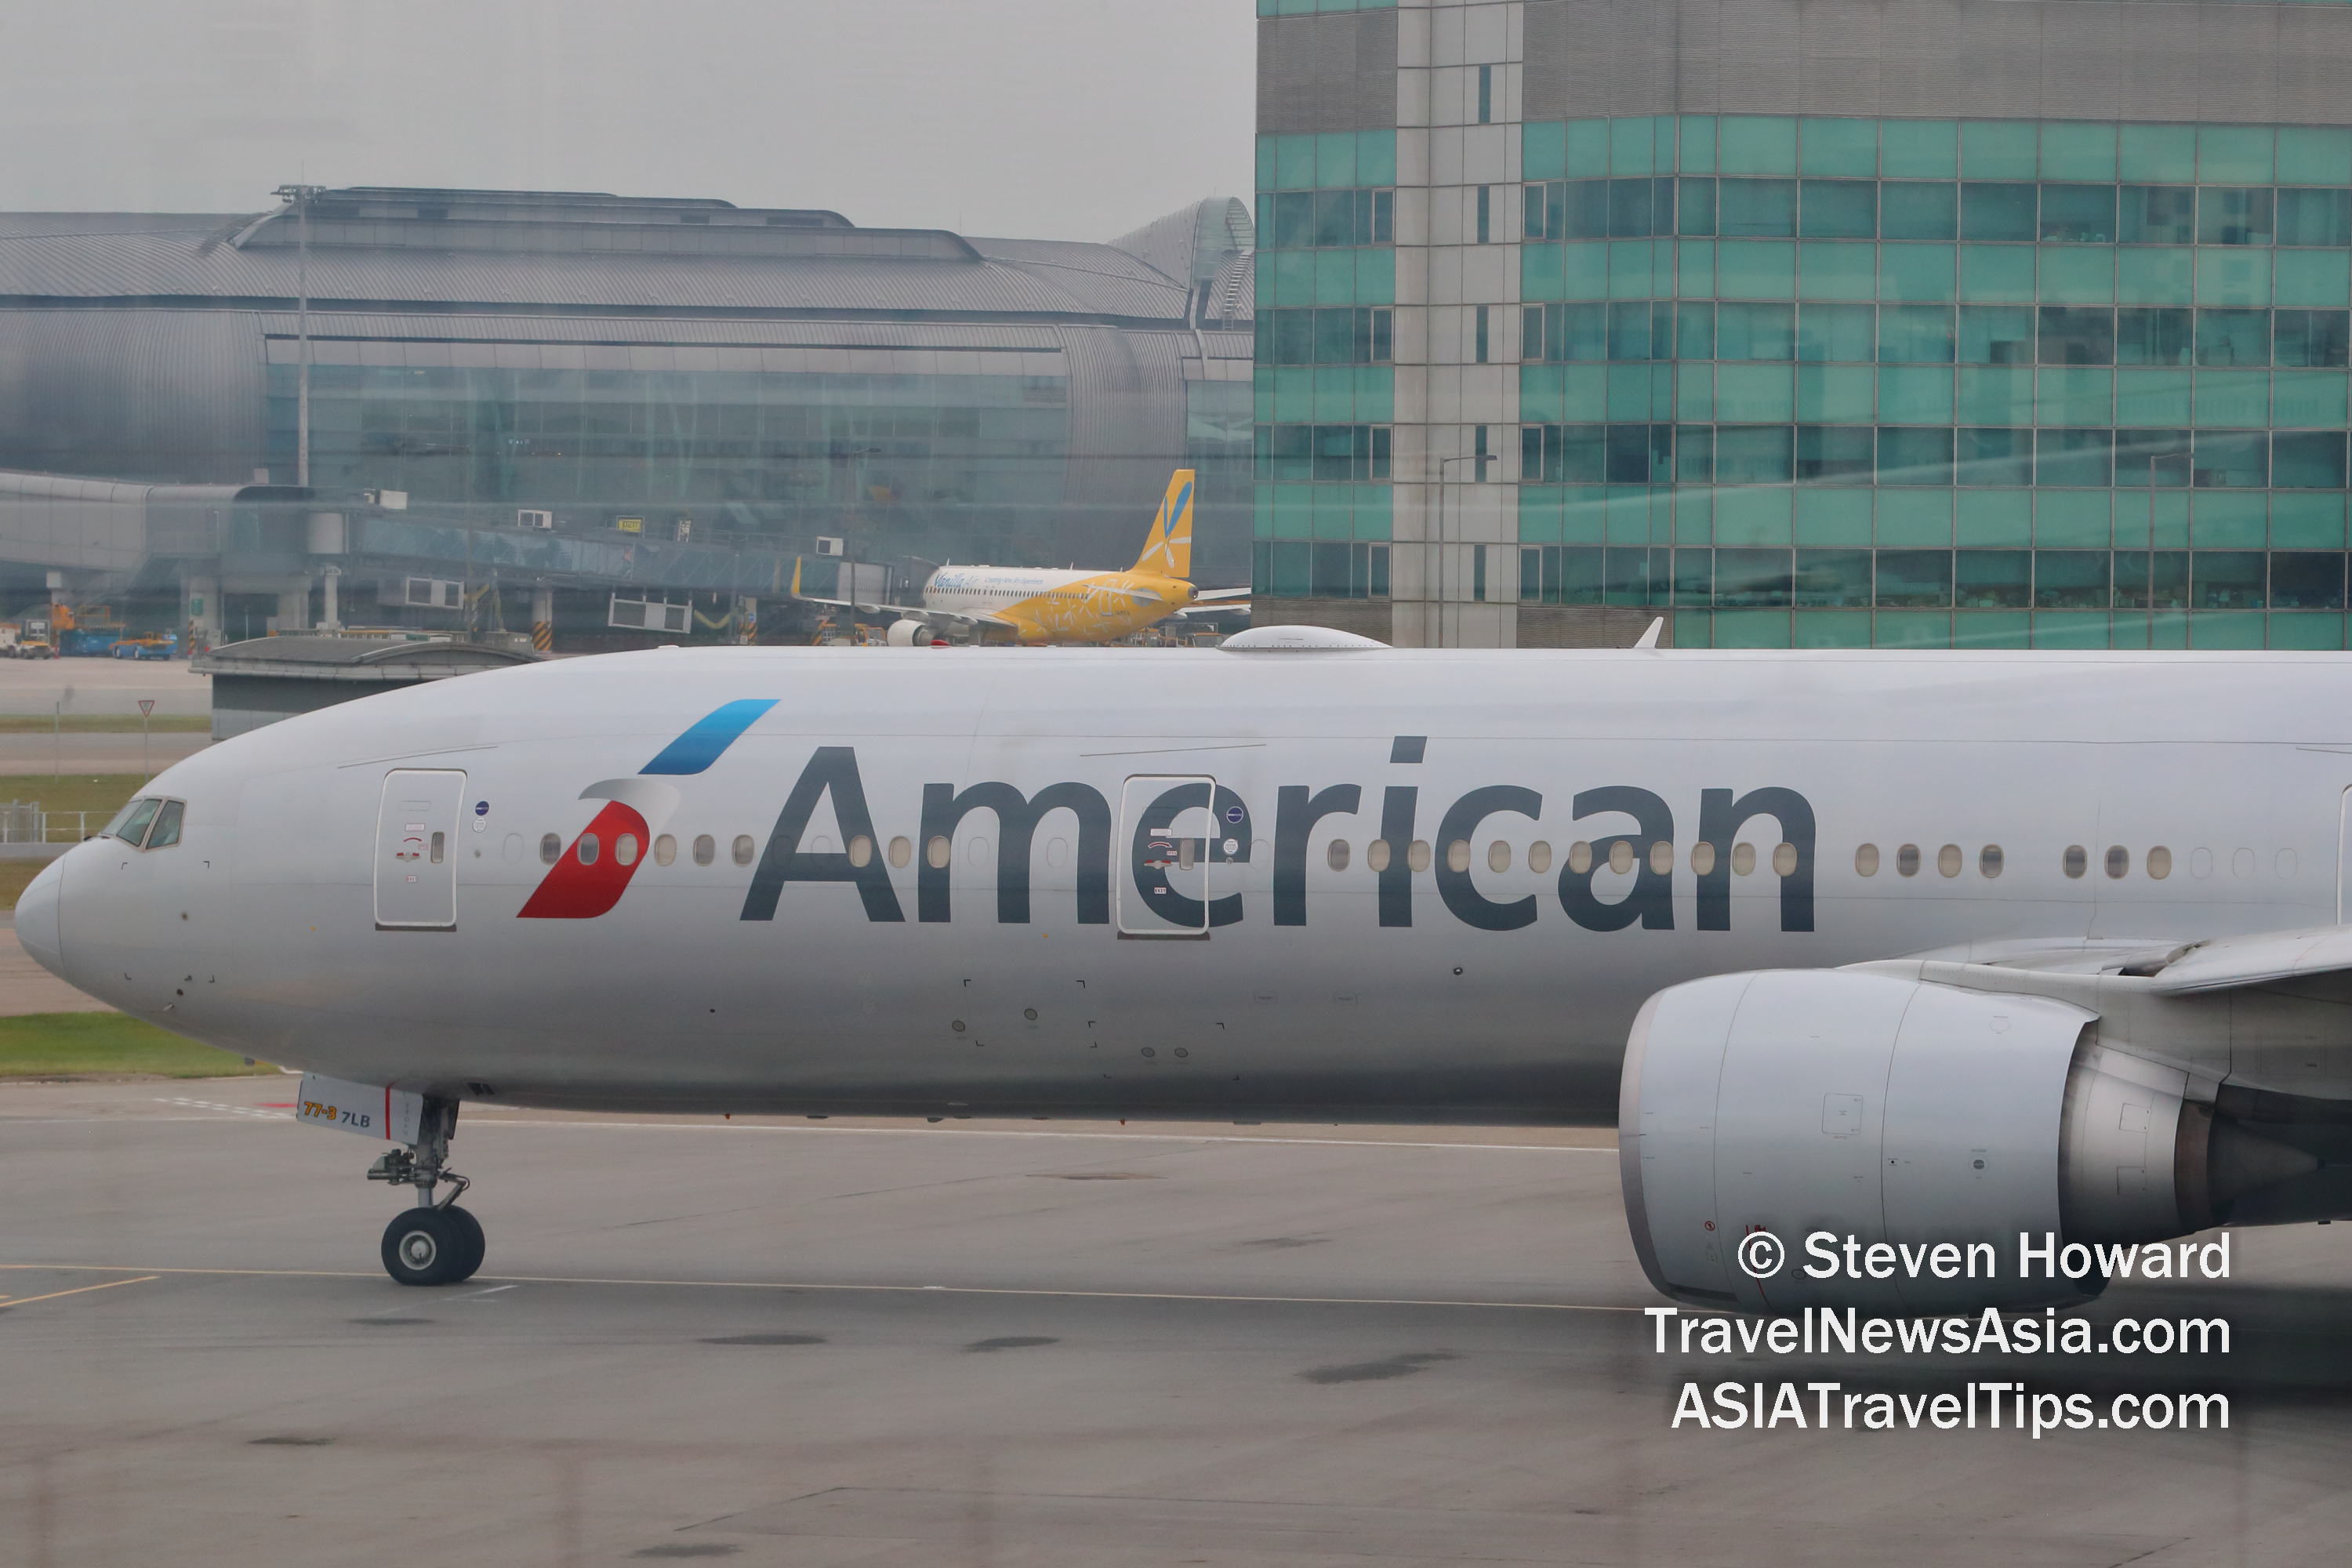 American Airlines Boeing 777-300 reg: N718AN at HKIA in 2019. Picture by Steven Howard of TravelNewsAsia.com Click to enlarge.